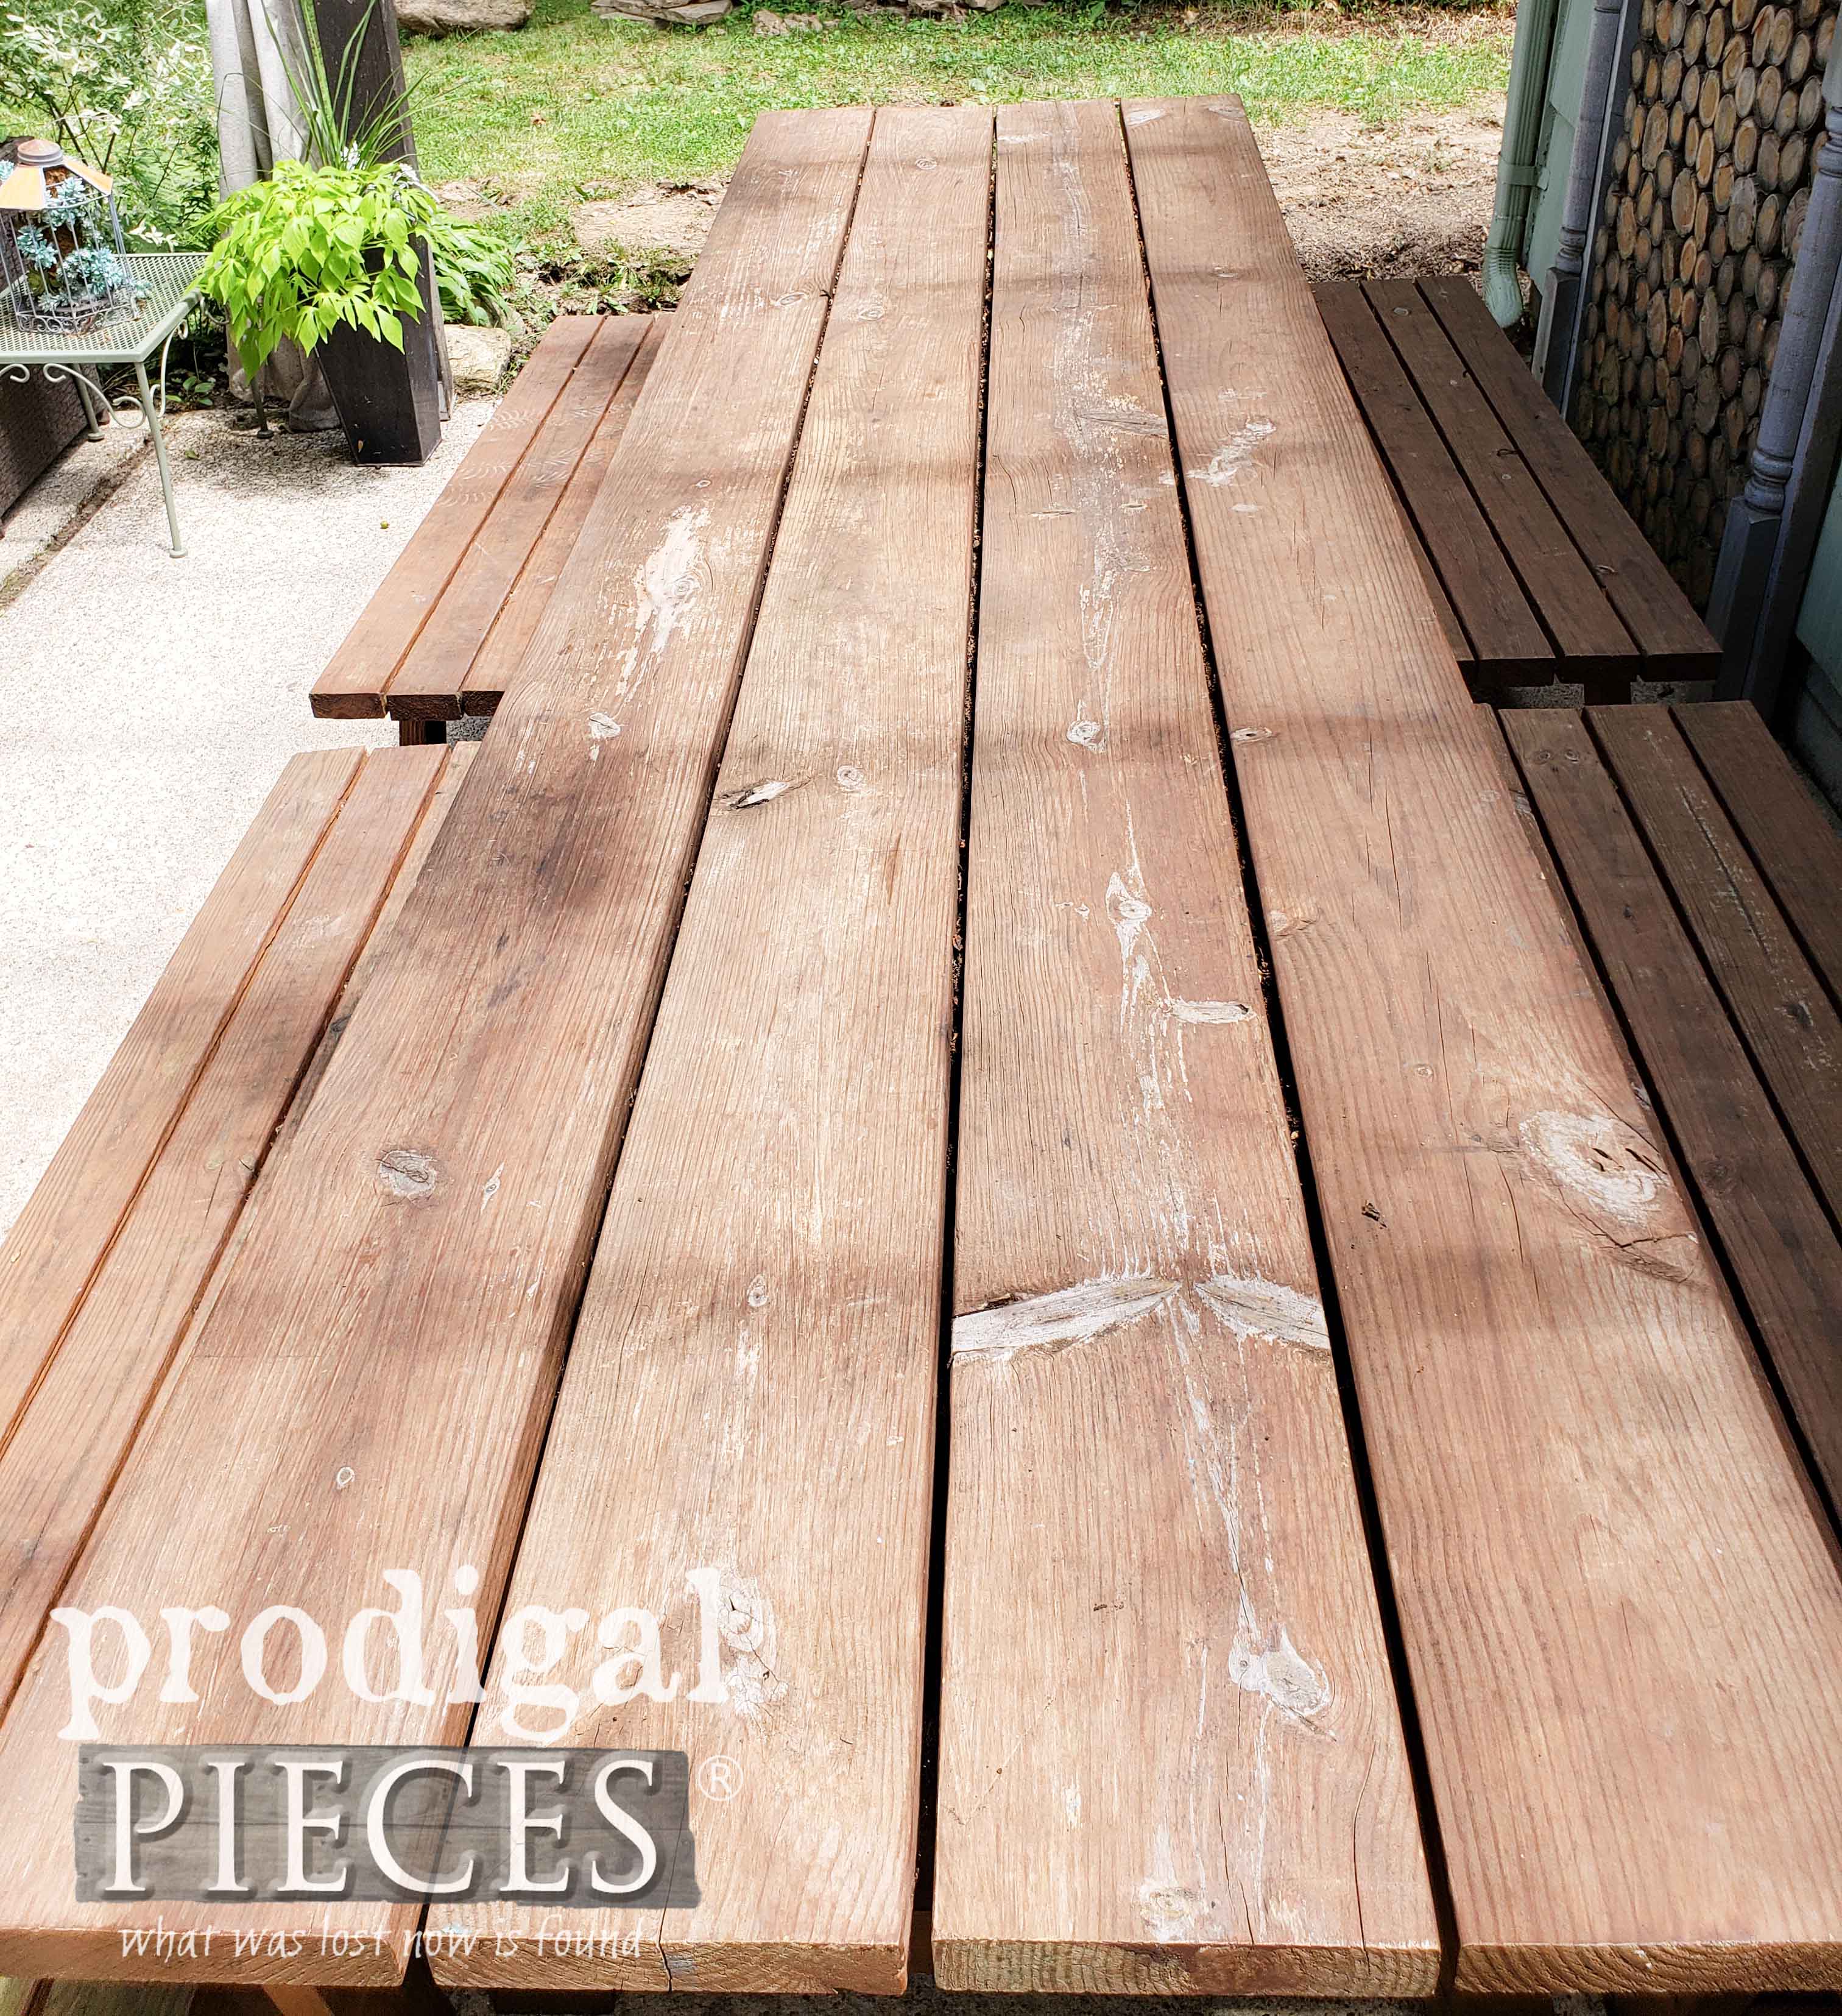 Faded & Worn Picnic Table Top Before Makeover by Prodigal Pieces | prodigalpieces.com